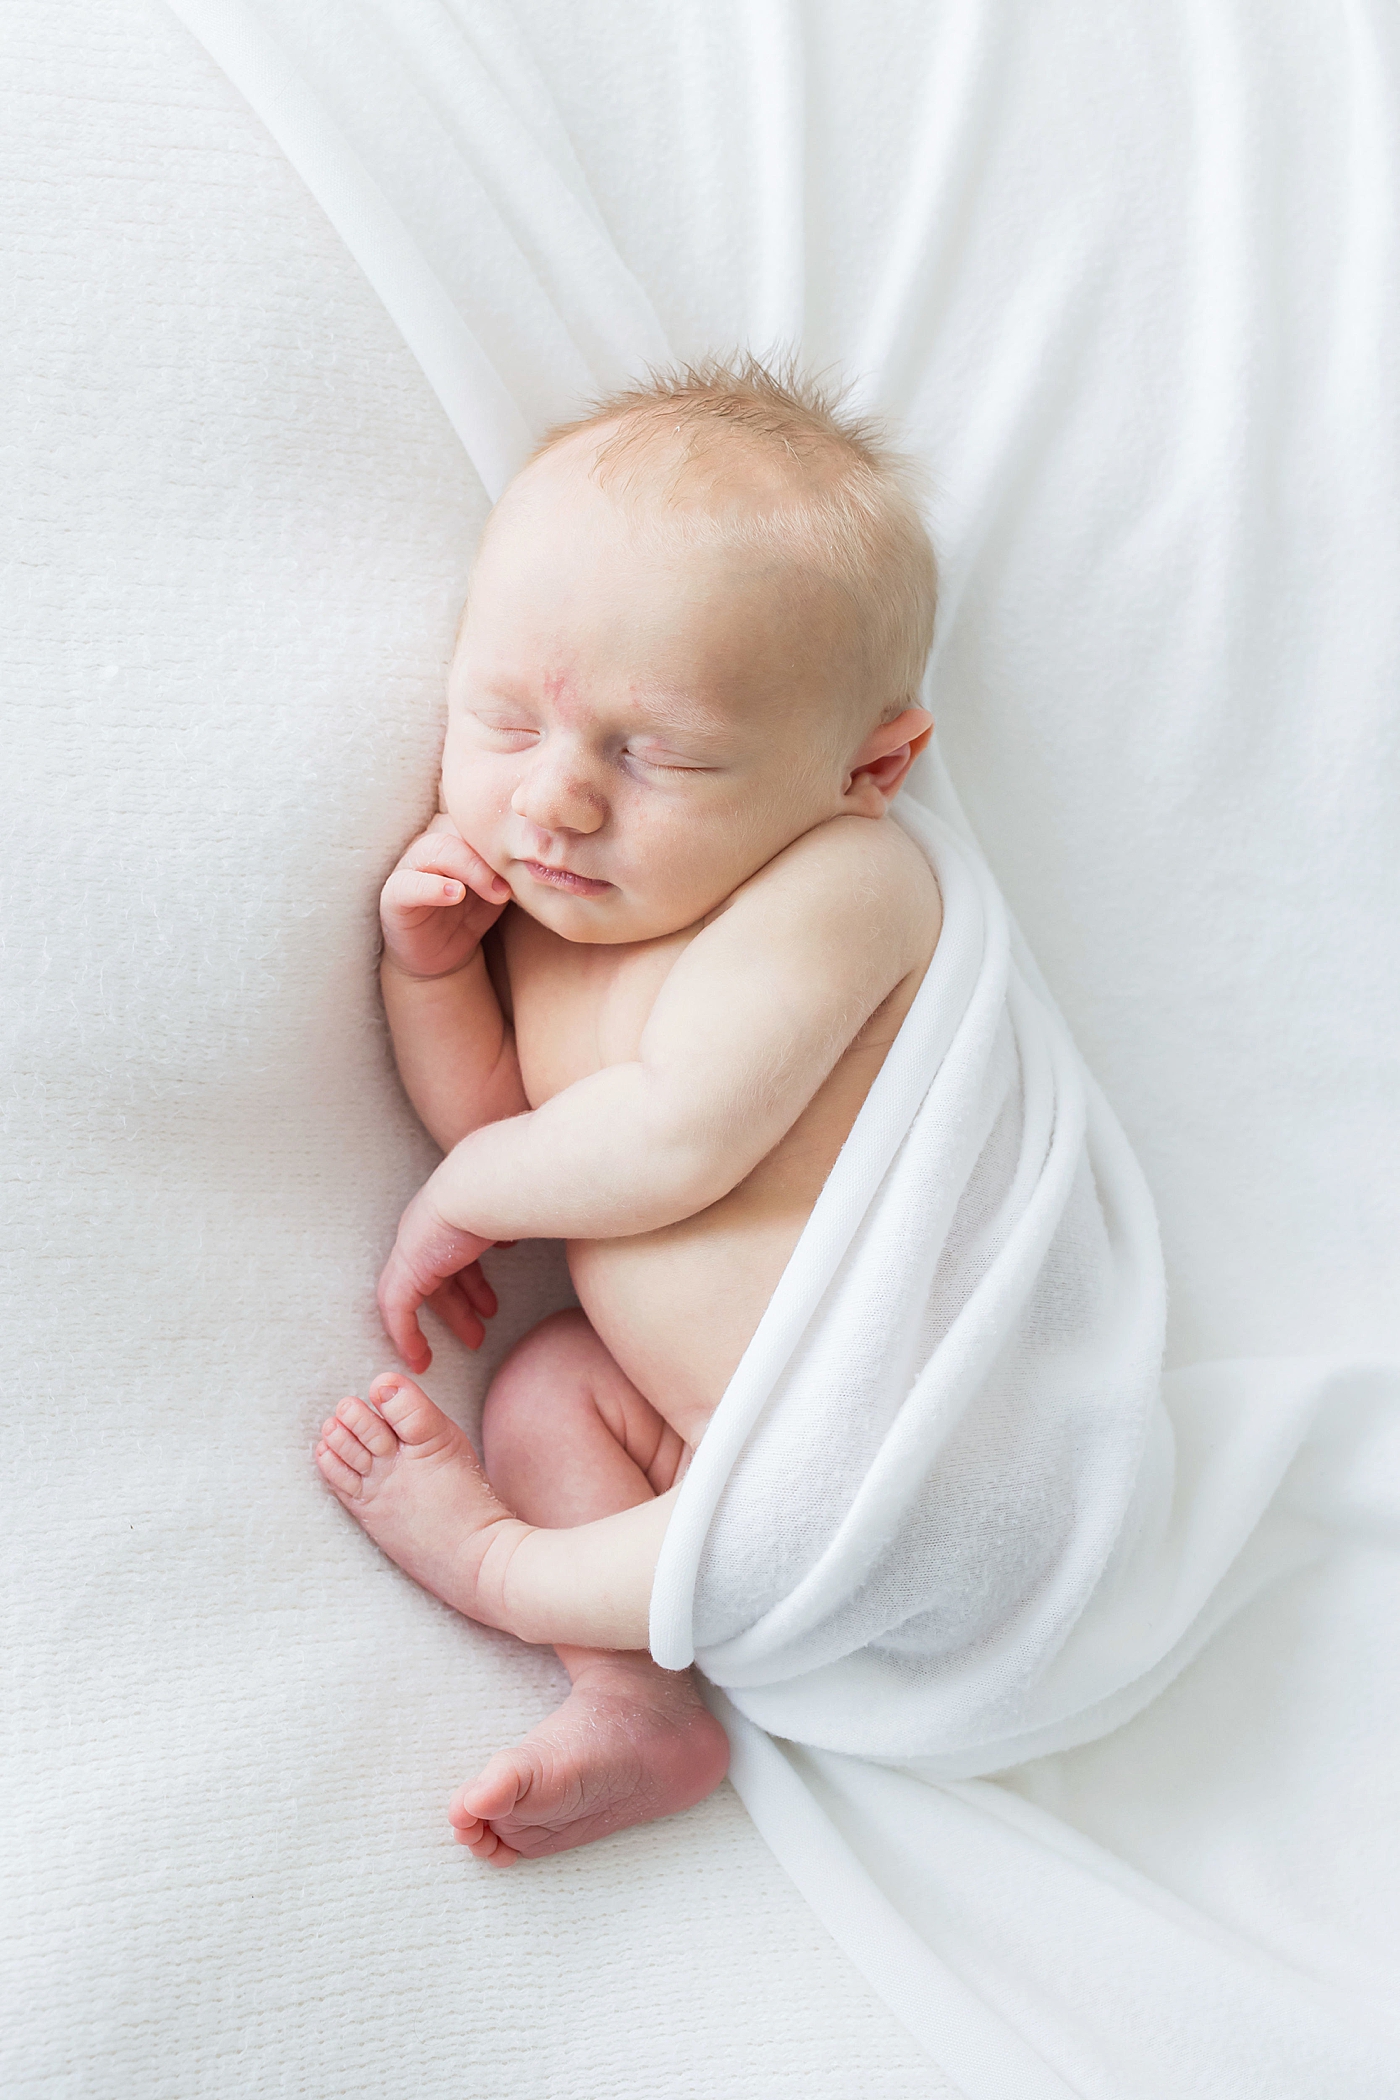 Baby boy sleeping on his side with hand up by his face. Photo by Fresh Light Photography.